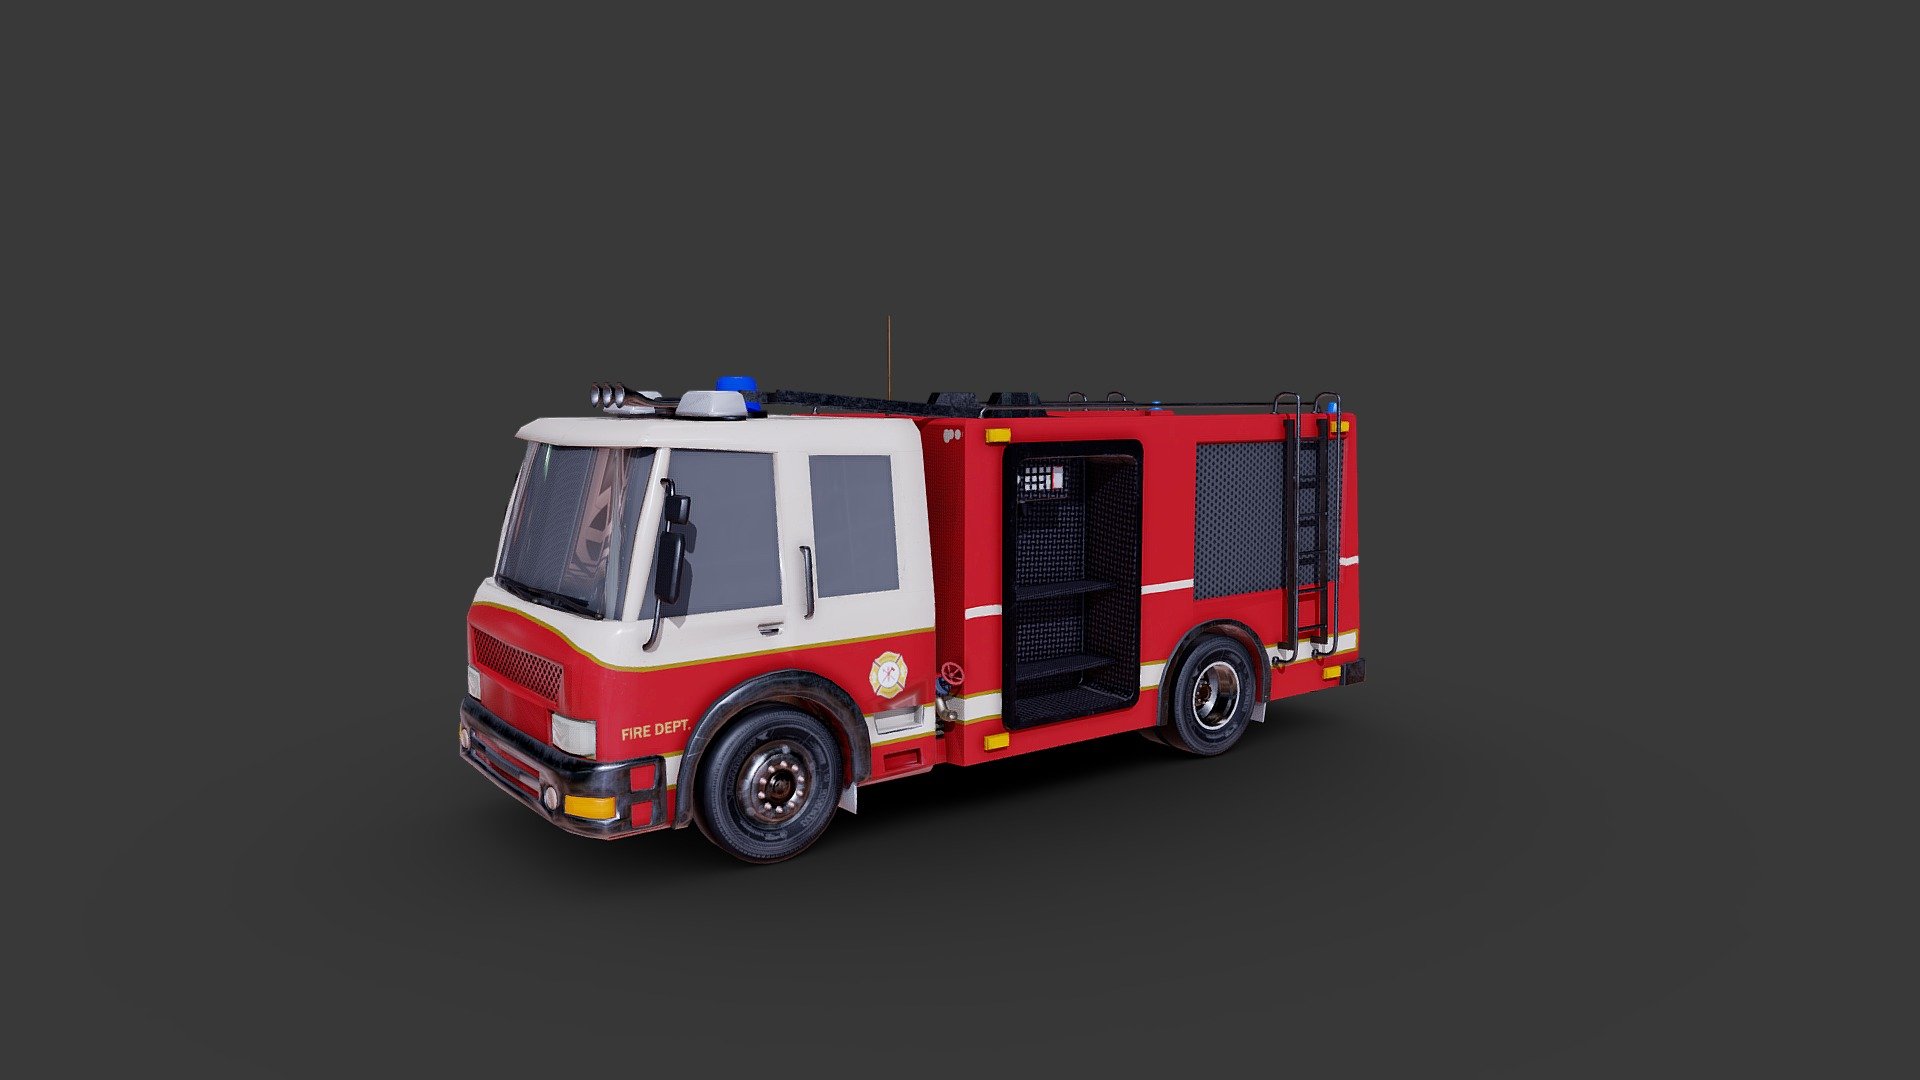 This ia a highly optimized 3D asset designed to work with the Unity Universal Render Pipline in an Oculus Quest 2 fire fighting simulaton application 3d model